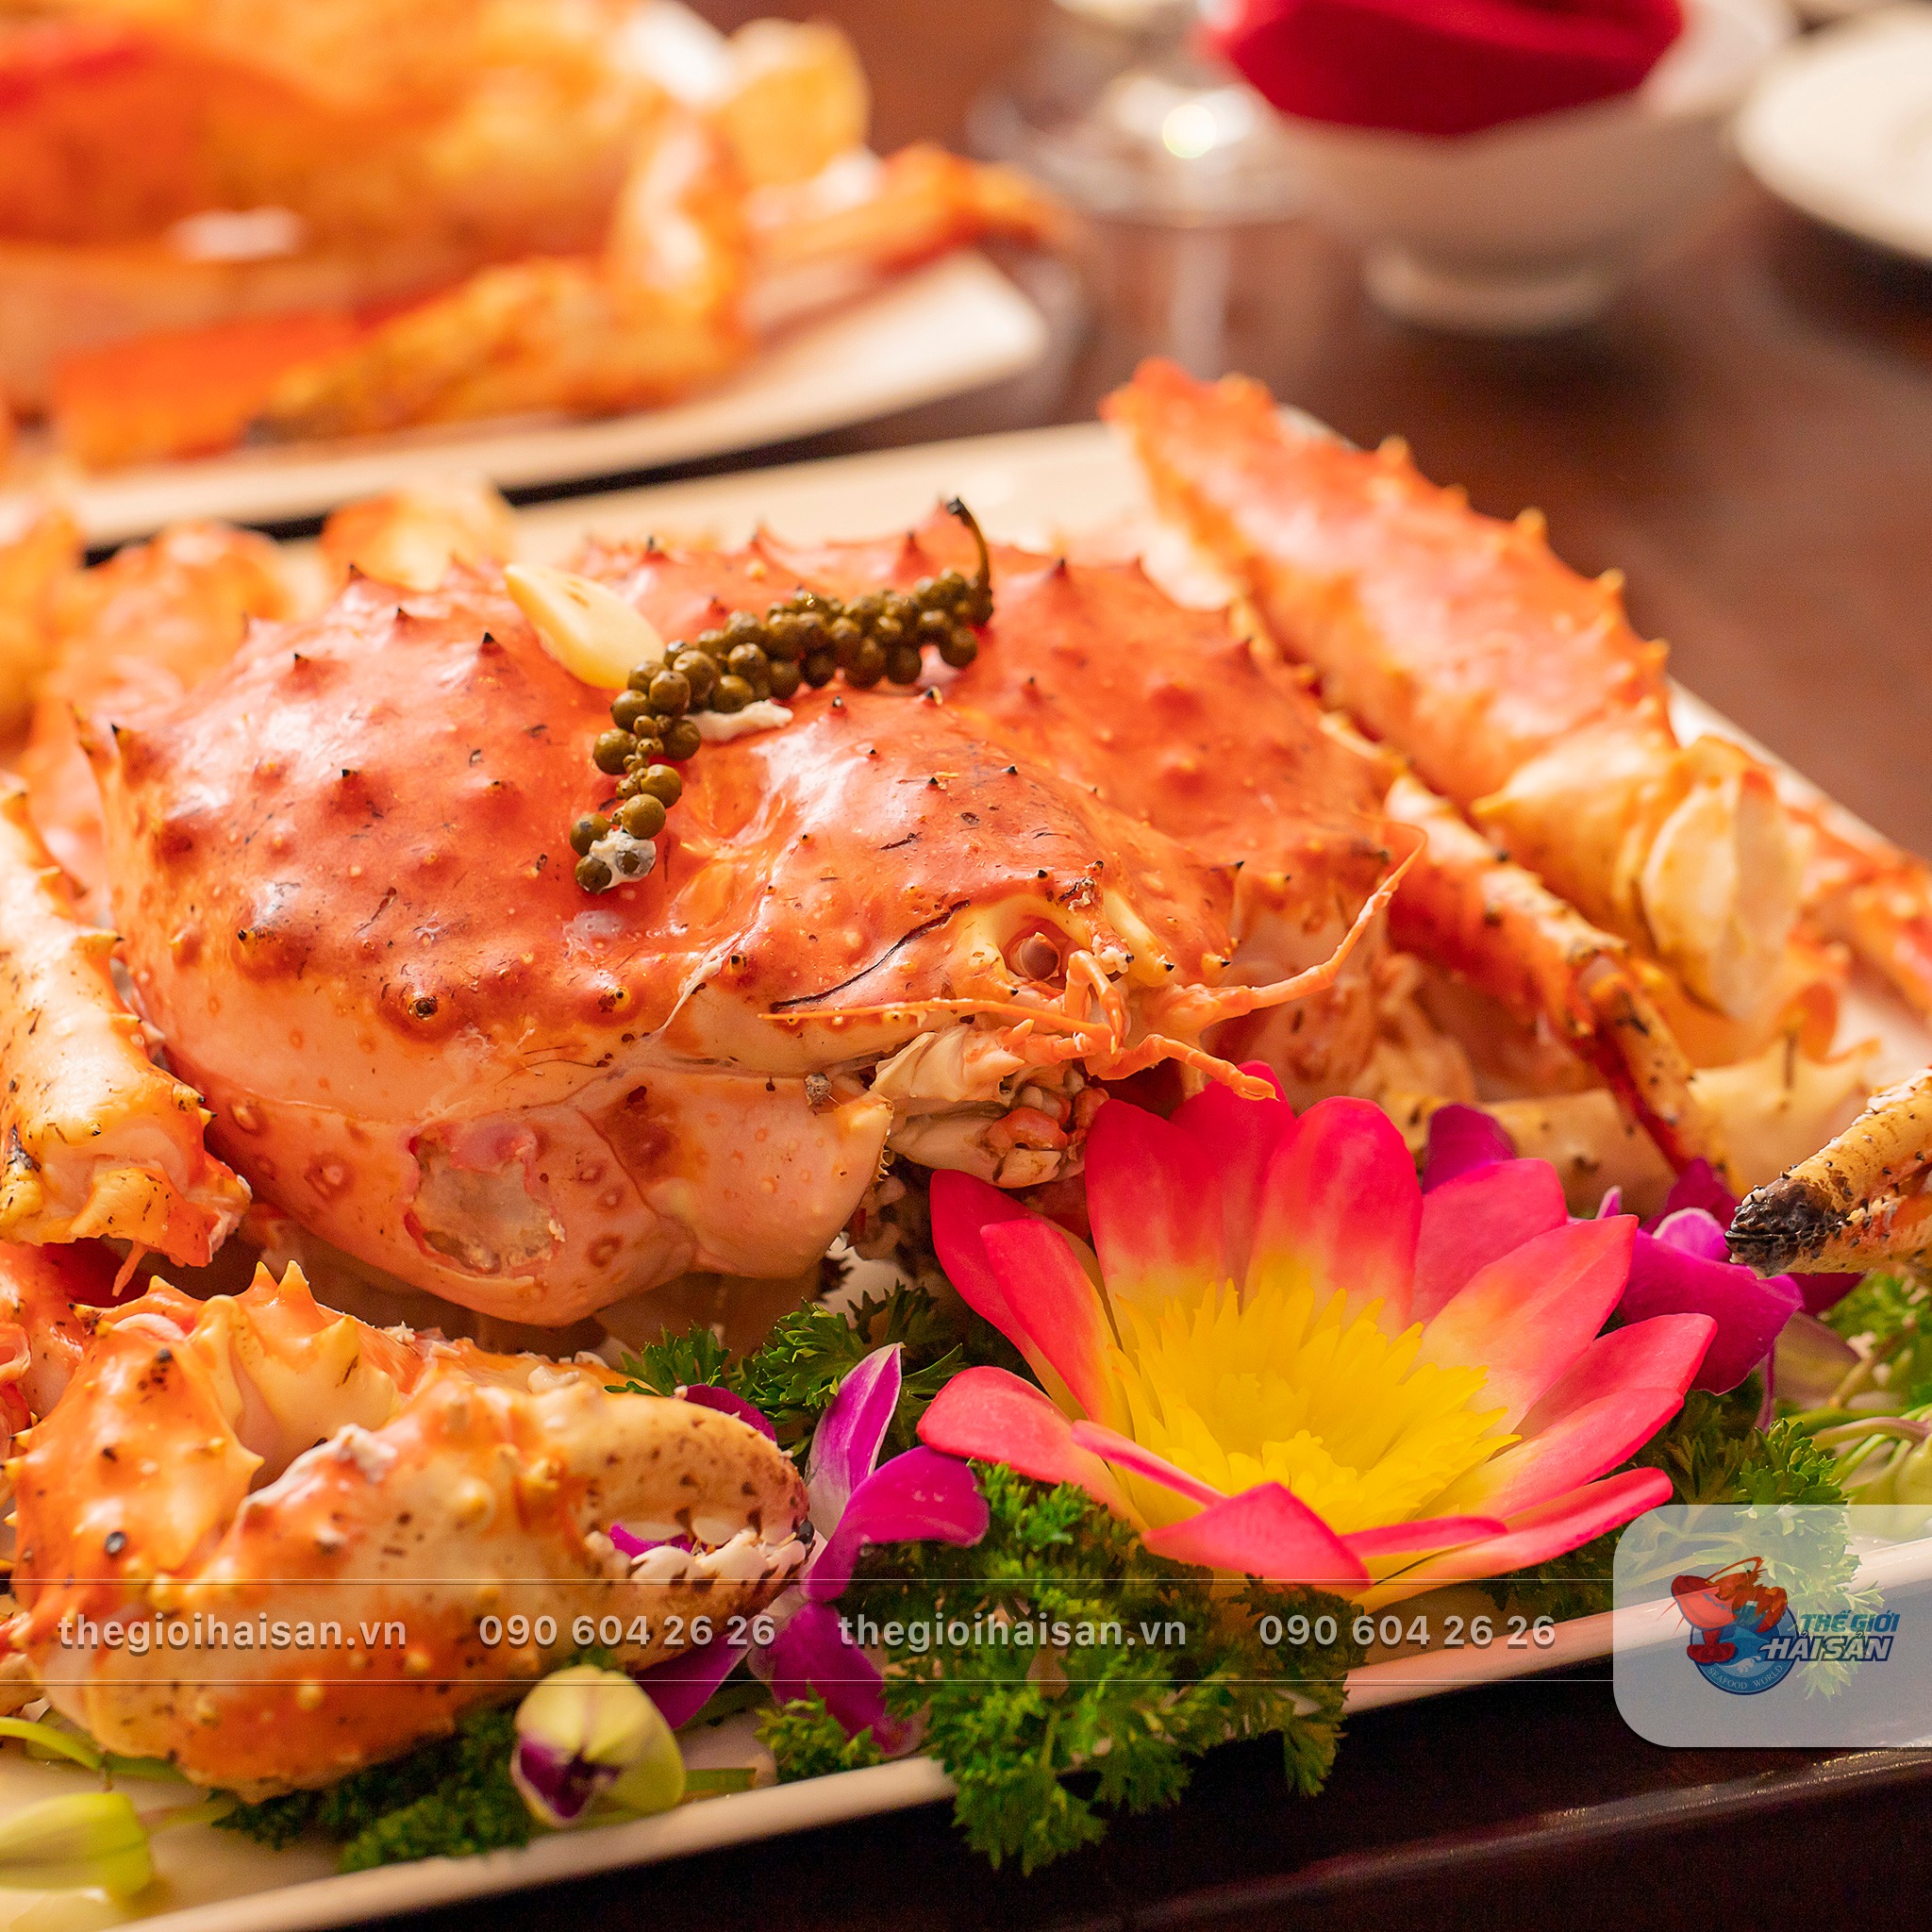 King crab is beautifully cooked and decorated at the No.1 seafood restaurant in Hanoi